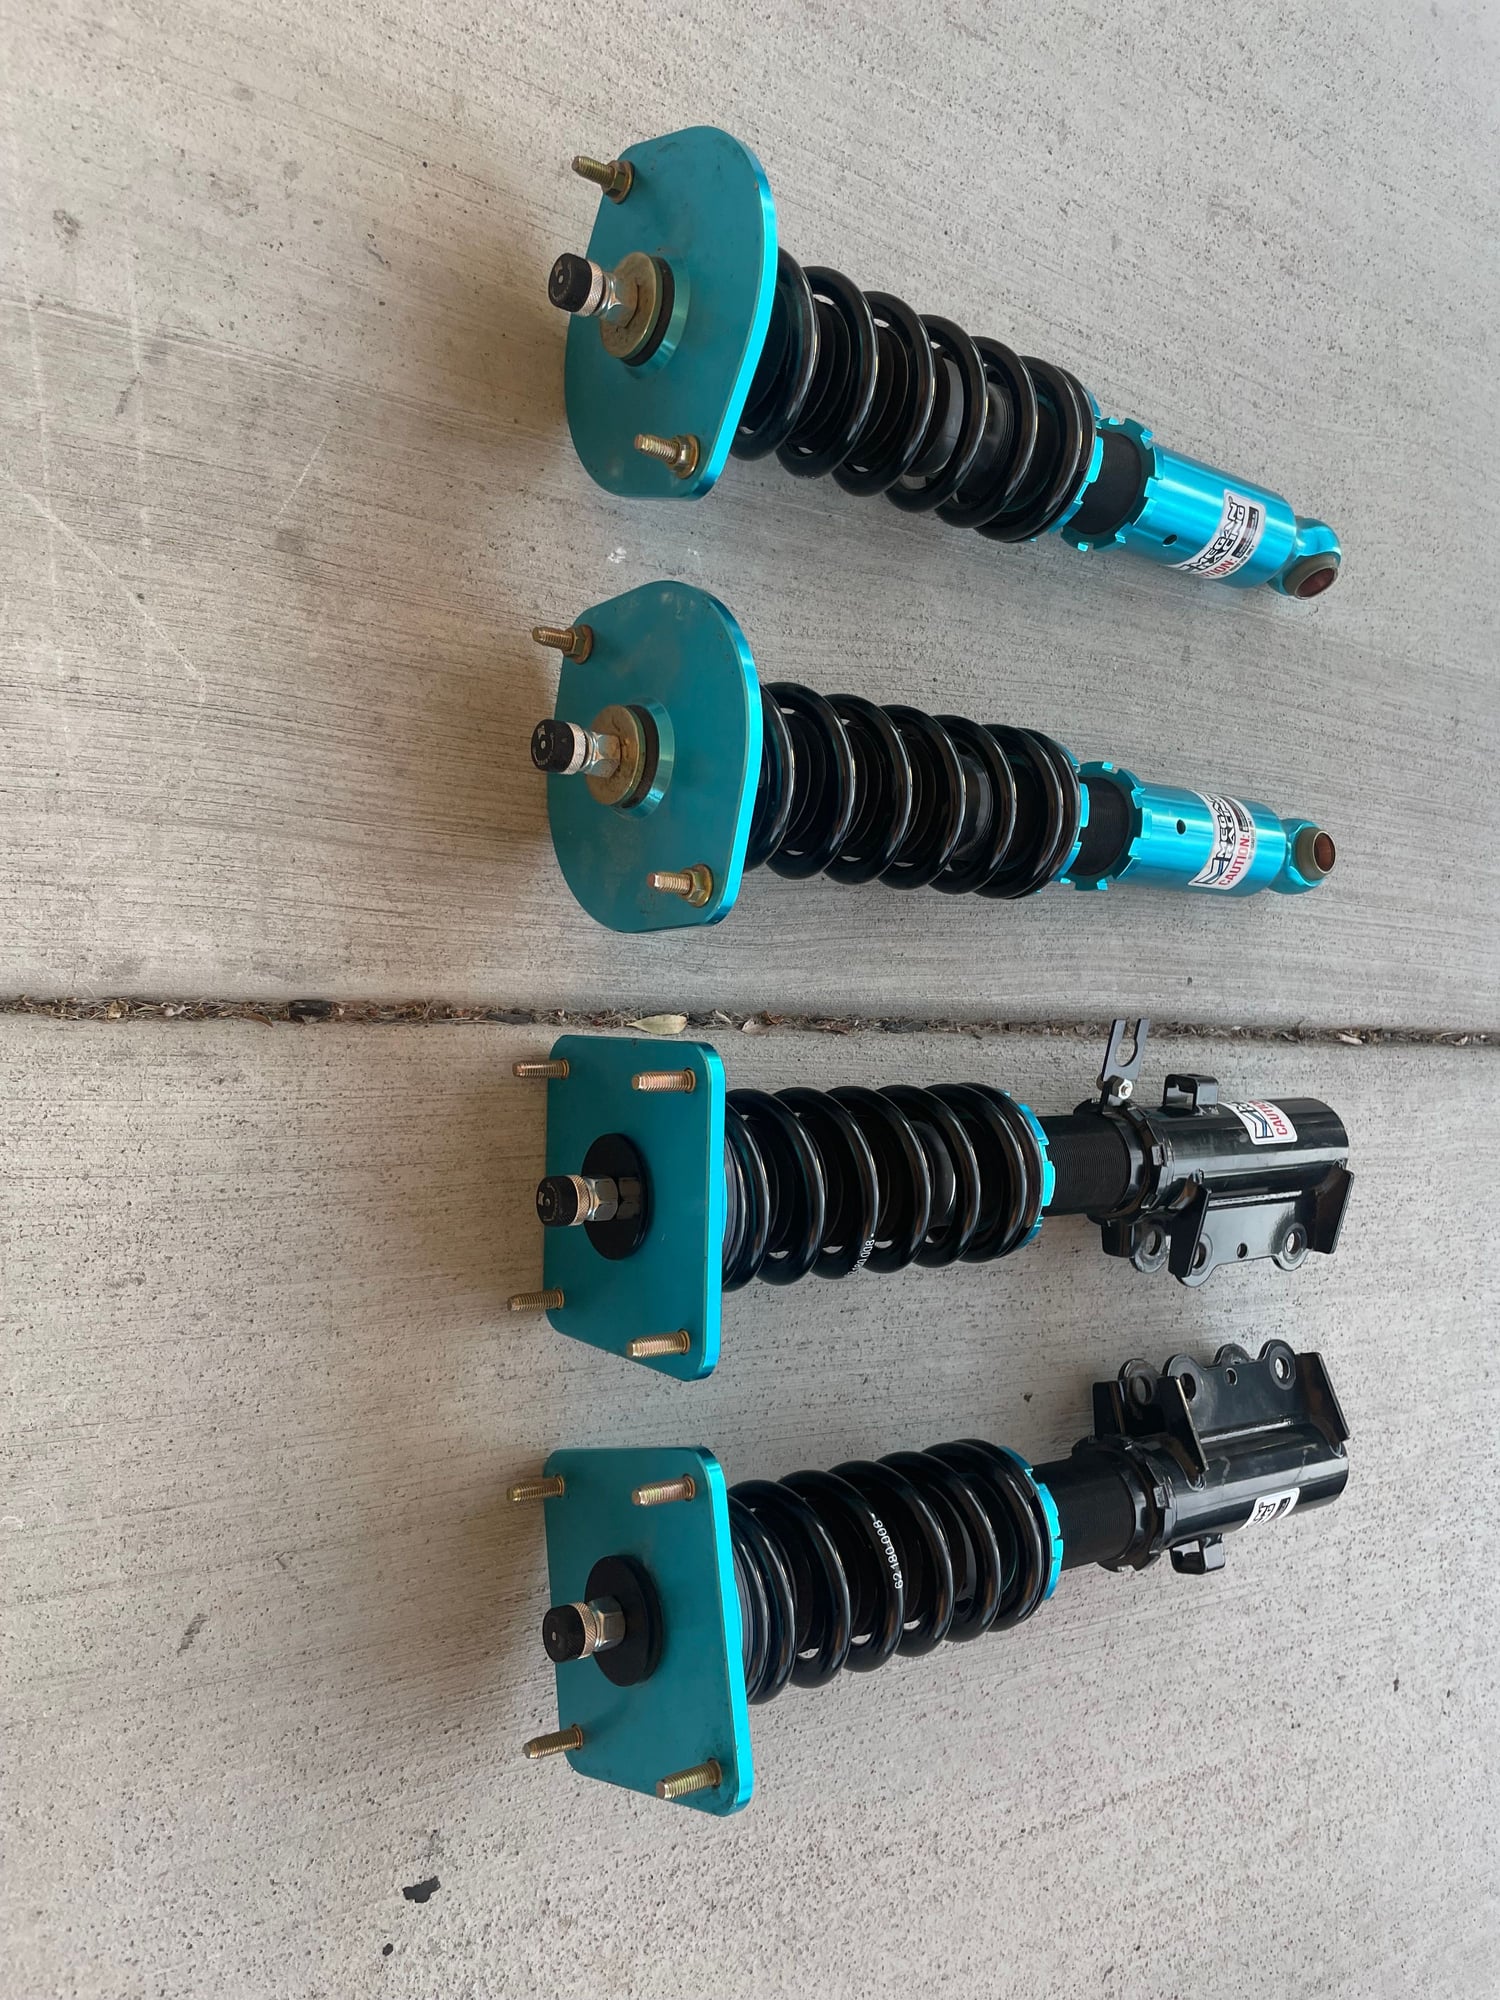 Steering/Suspension - 86-91 FC Rx-7 Megan Racing Coilovers Mazda Rx7 - Used - 1986 to 1991 Mazda RX-7 - San Leandro, CA 94579, United States